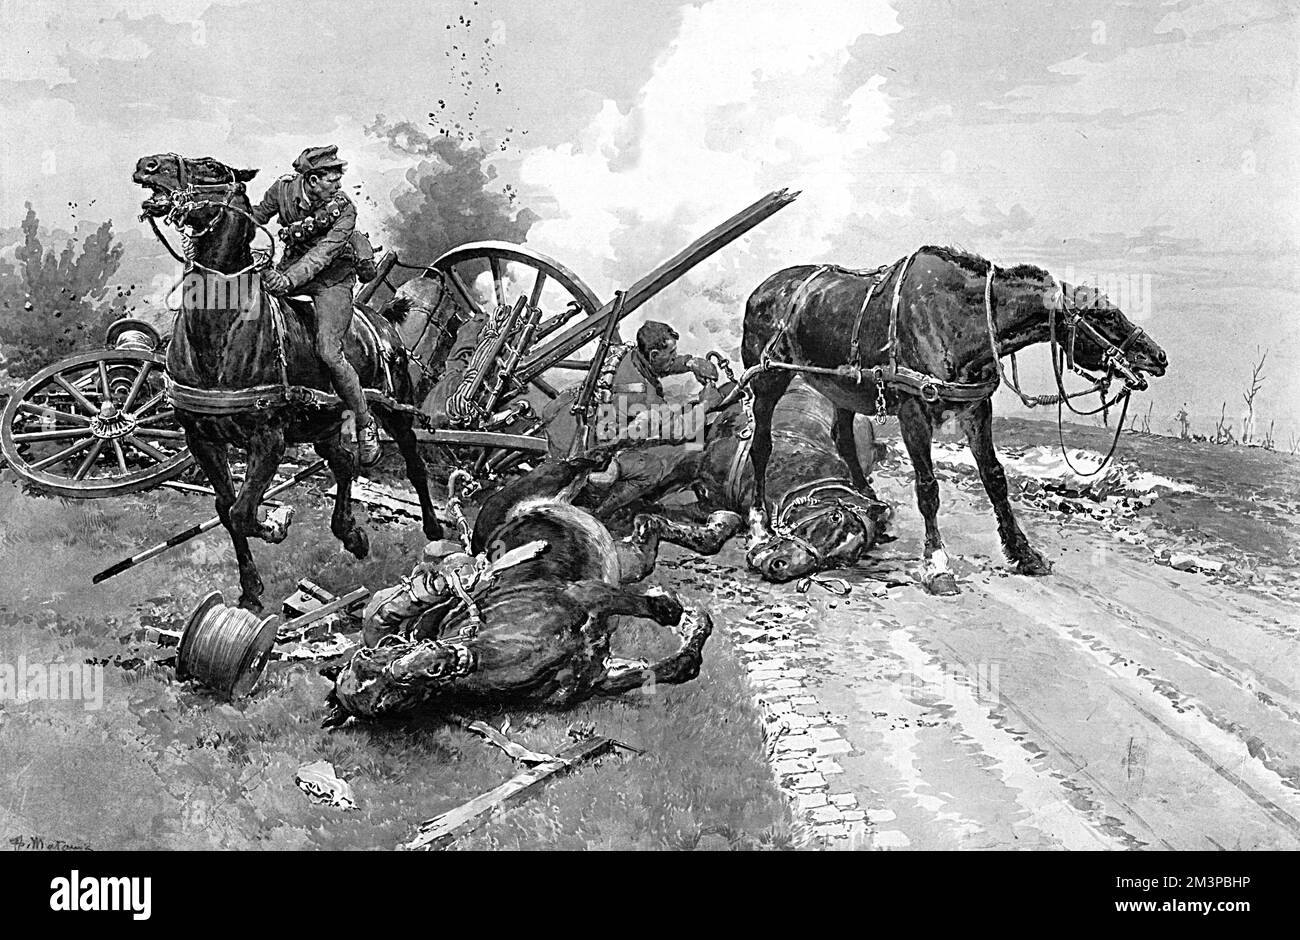 Telegraph work in Gallipoli - an unrecorded incident of individual bravery.  Two men of the 1st Royal Munster Fusiliers bringing two uninjured horses back to British lines during a severe Turkish bombardment.  According to an eye-witness account by an officer, 'This incident deserves to be recorded.  We were in trenches just on this side of the foreground; a four-horsed wagon containing poles for telegraphic purposes was coming over the hill, and just as it got to the crest a shell dropped near the waggon, badly damaging it and killing two of the horses.  There were, however, still two horses Stock Photo